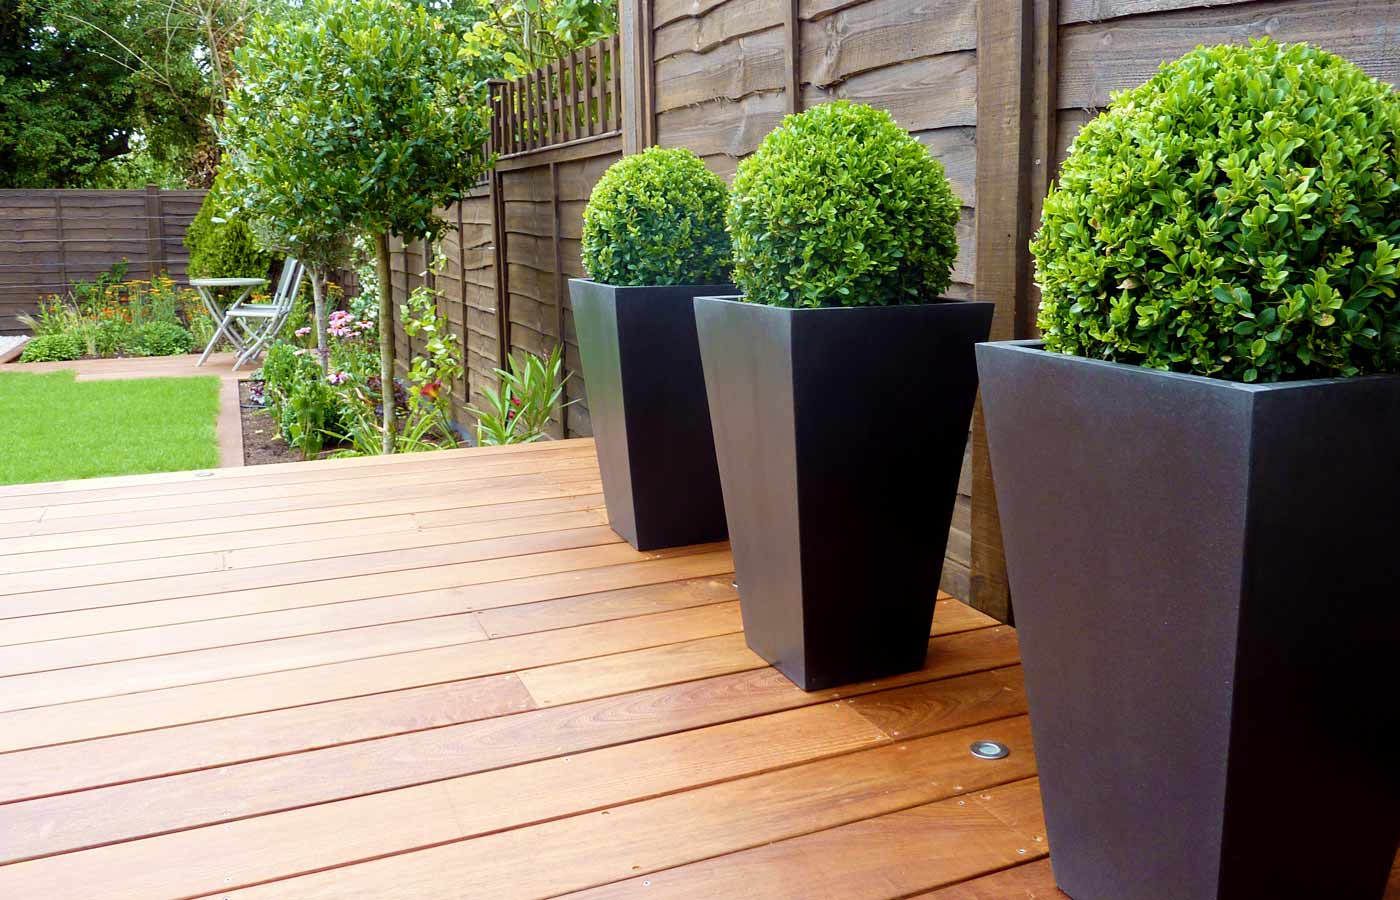 Planters with box balls in small garden